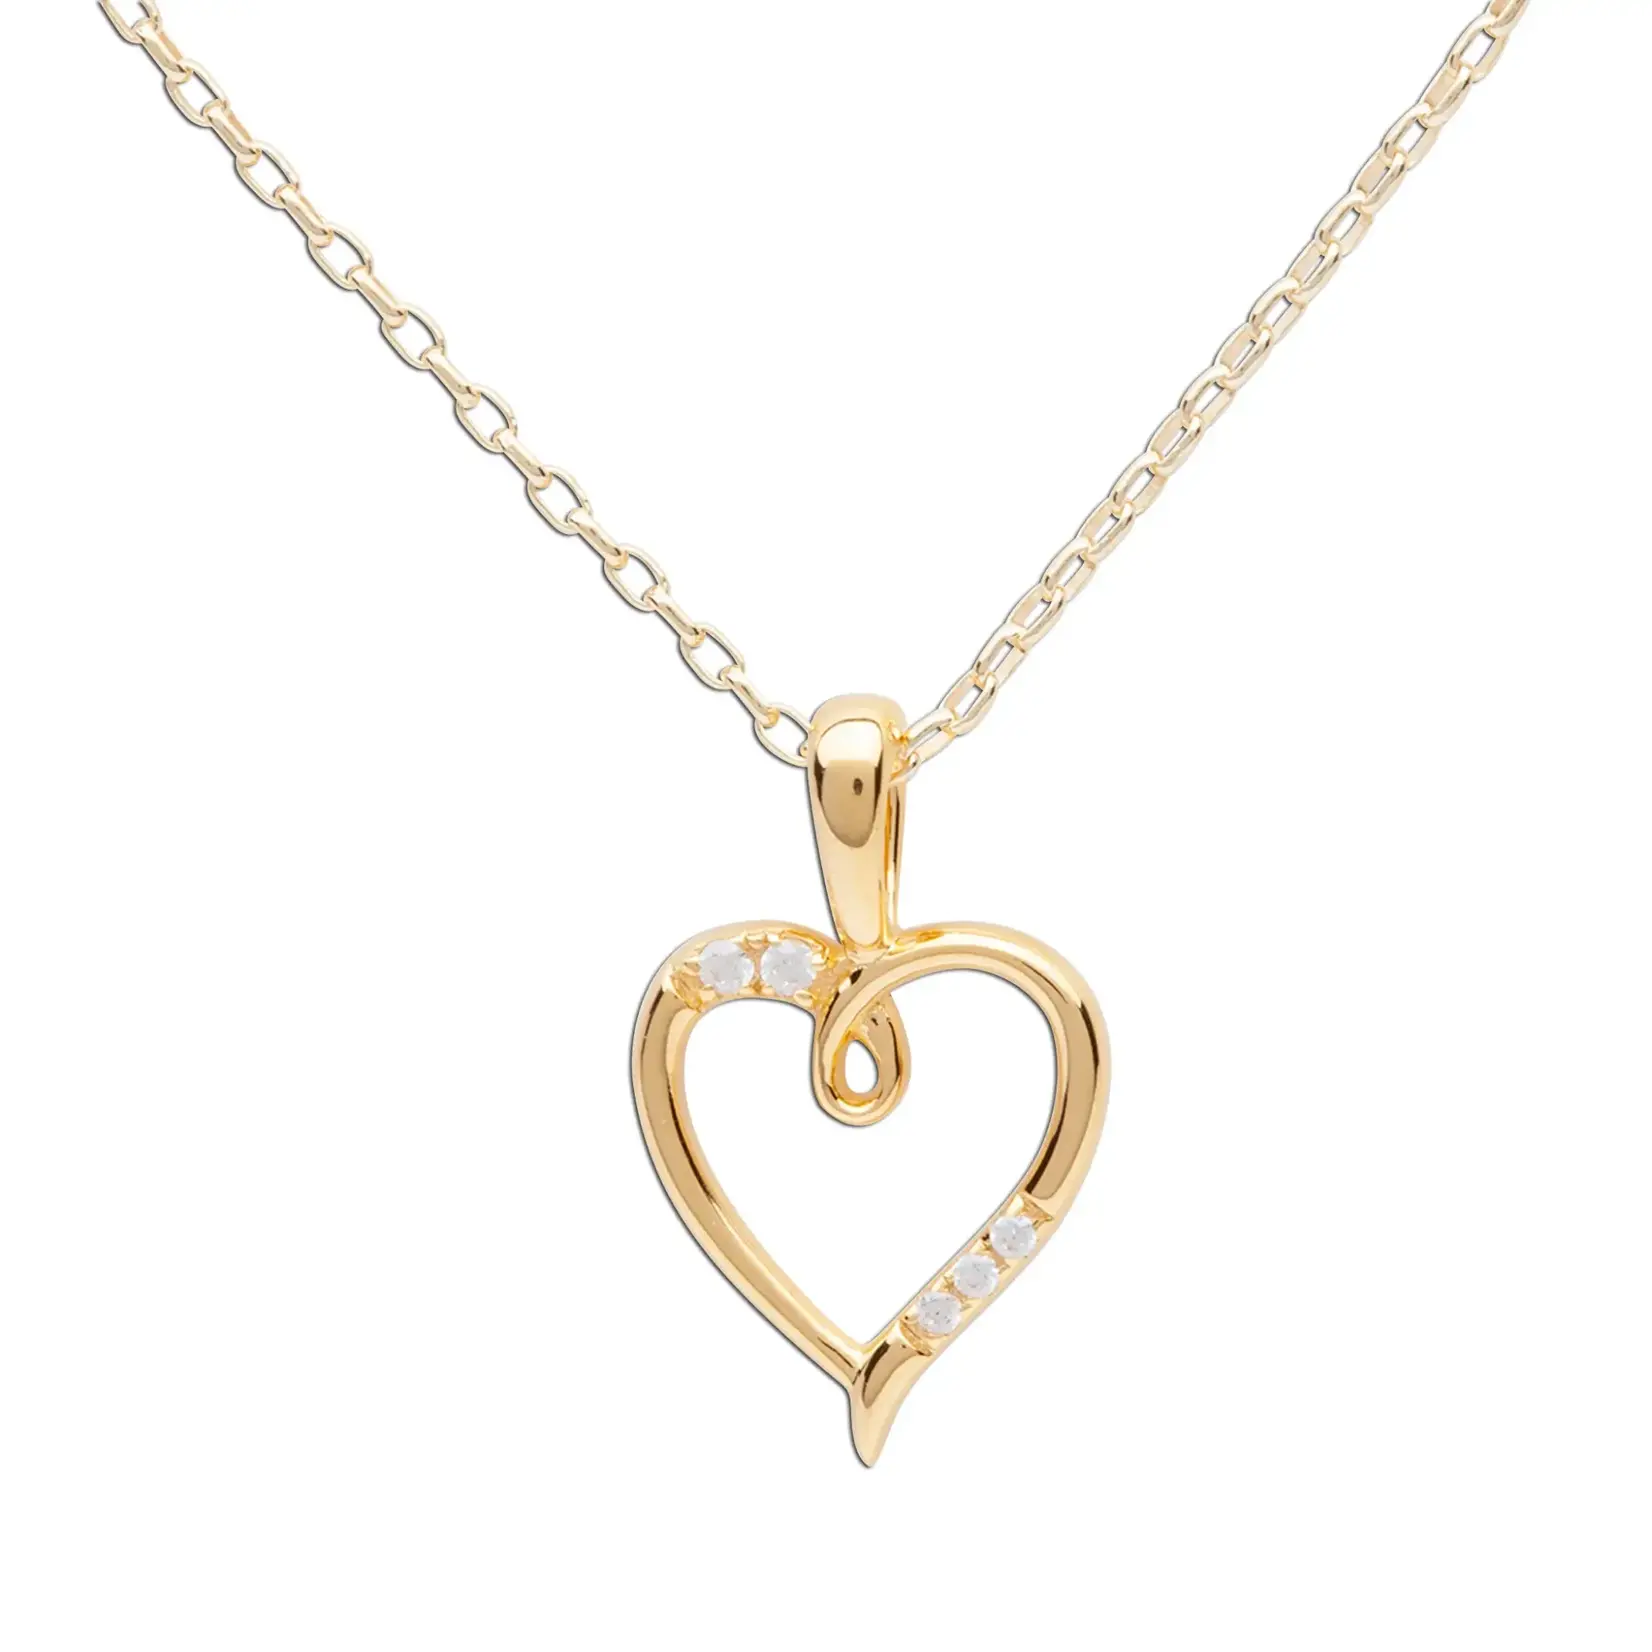 14k Gold-Plated Sterling Silver Heart Necklace with CZ